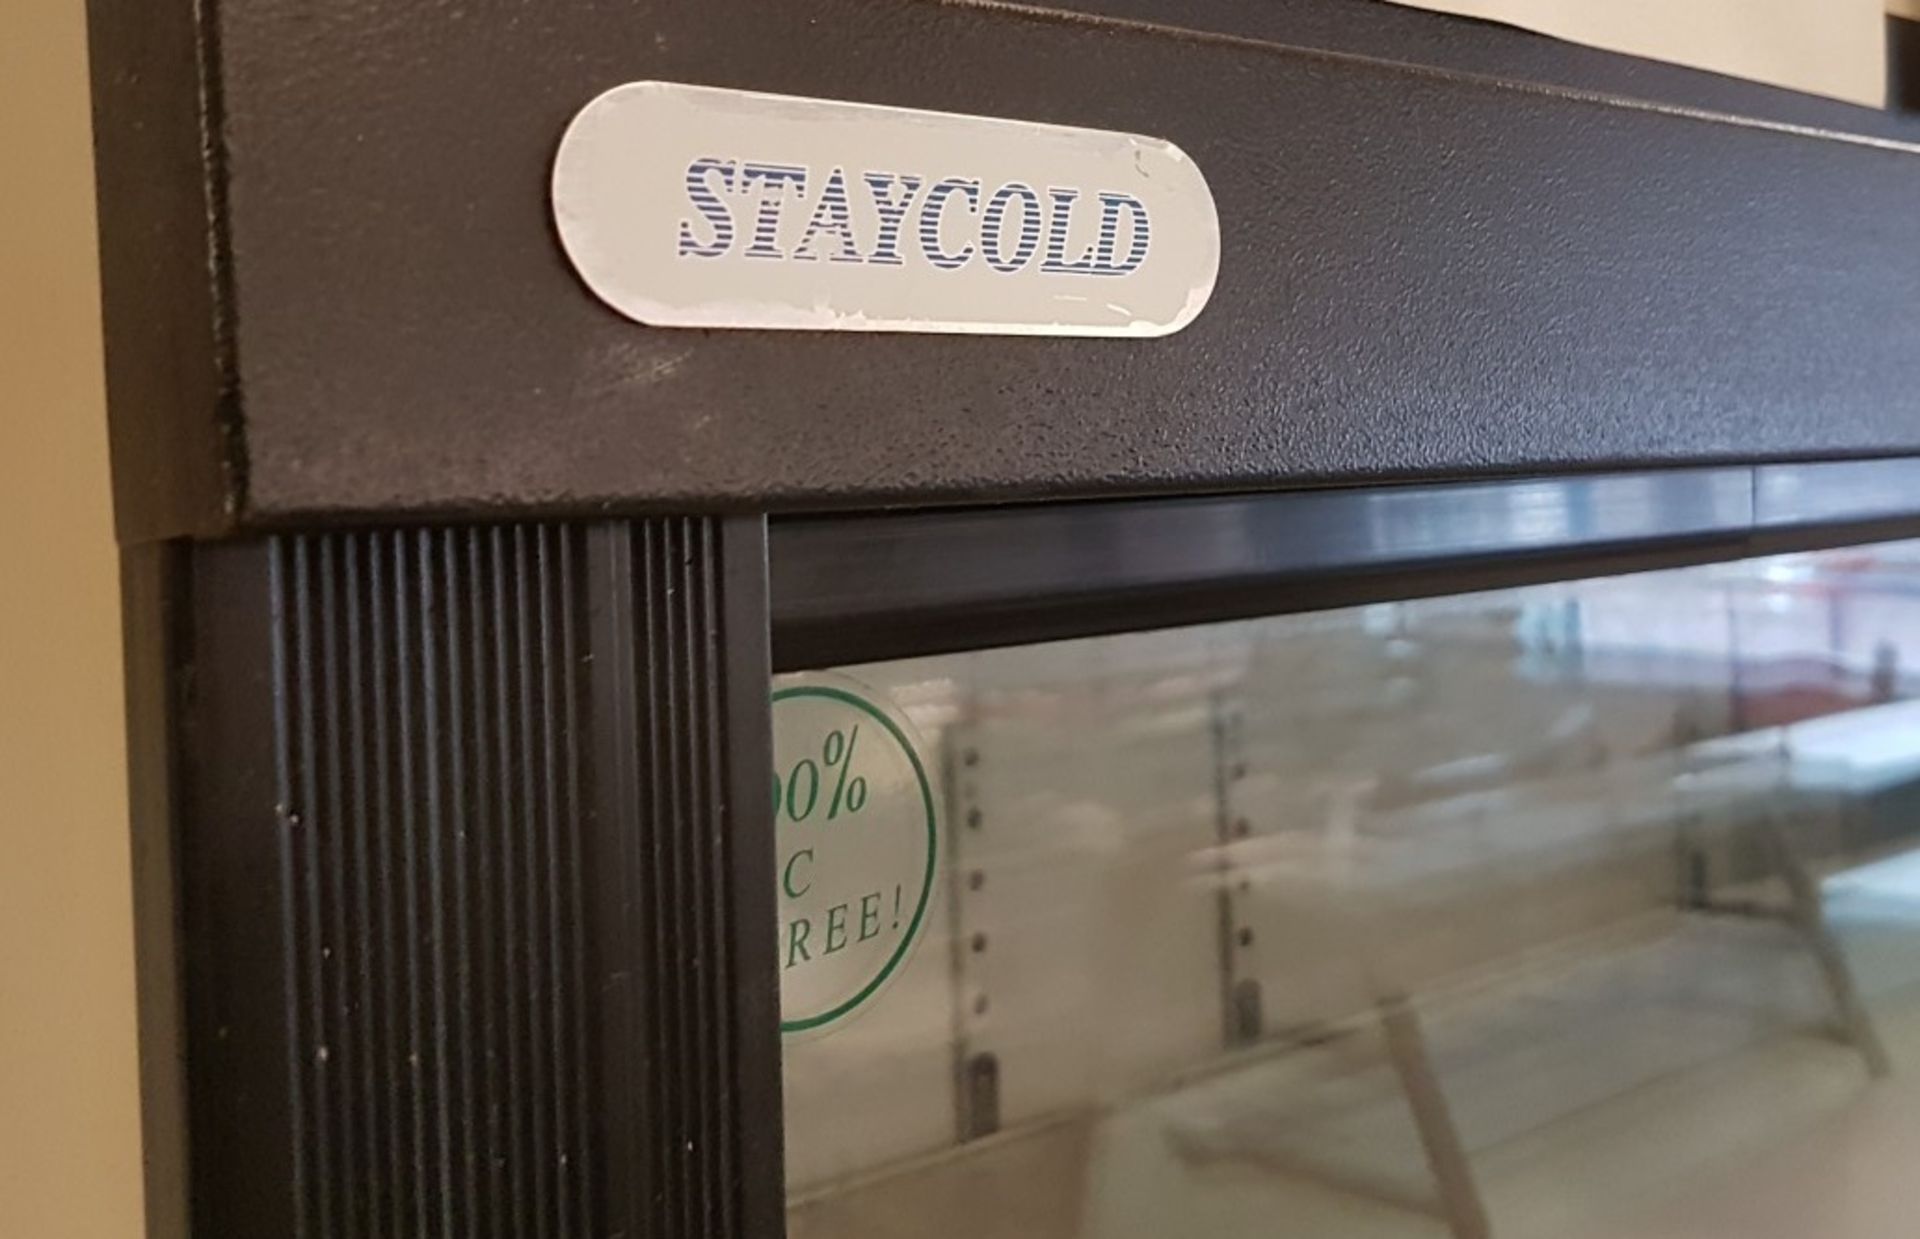 1 x STAYCOLD Branded Upright Fridge Unit With Sliding Door - Ref: SIN004 - CL278 - Dimensions: 136 x - Image 4 of 4